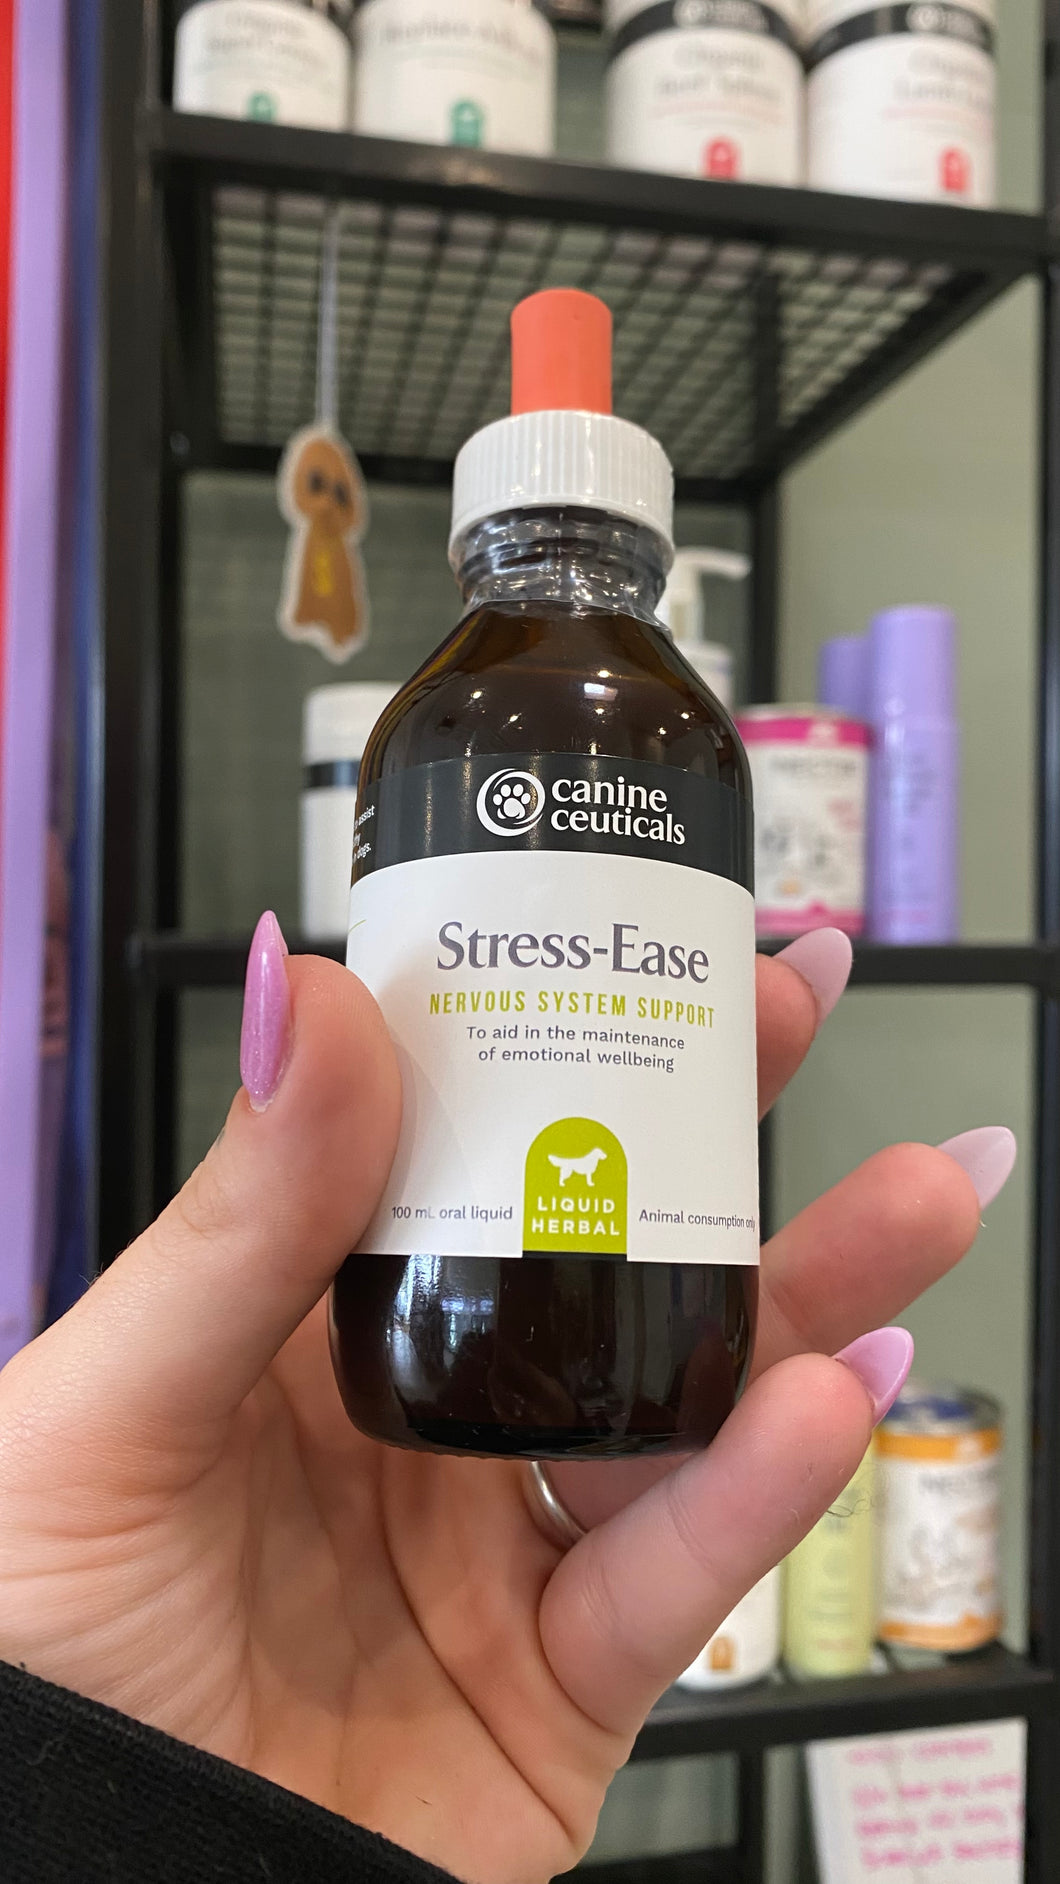 Canine Ceuticals- Stress-Ease liquid herbal drops